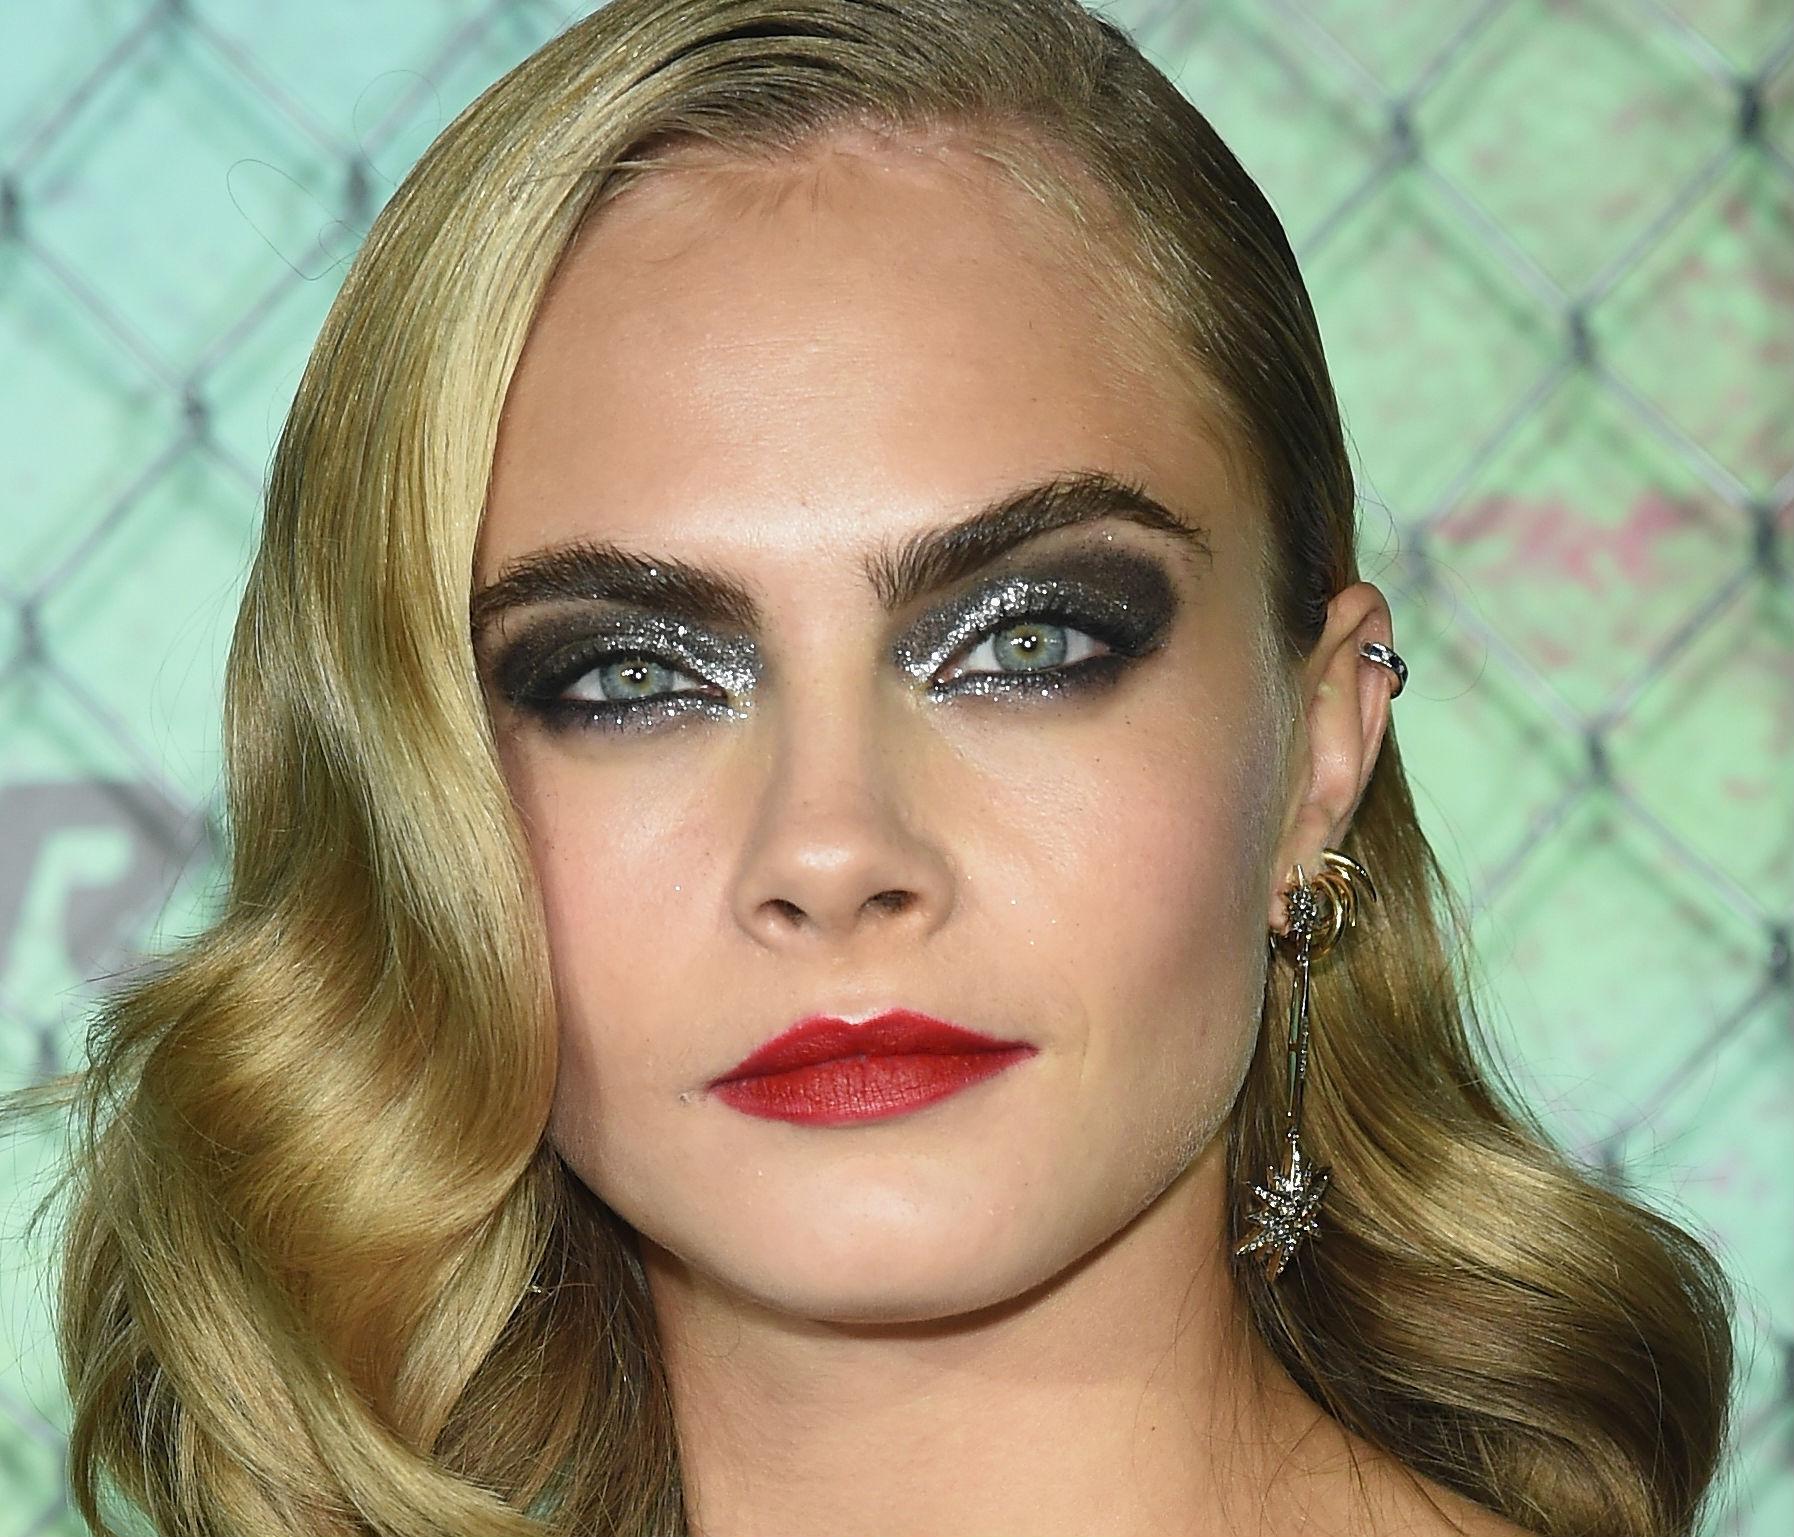 Eyebrow grooming and the trend for thicker eyebrows that are darker than someone’s head hair, driven by models such as Cara Delevigne, has seen eyebrow products become a market worth £42m annually